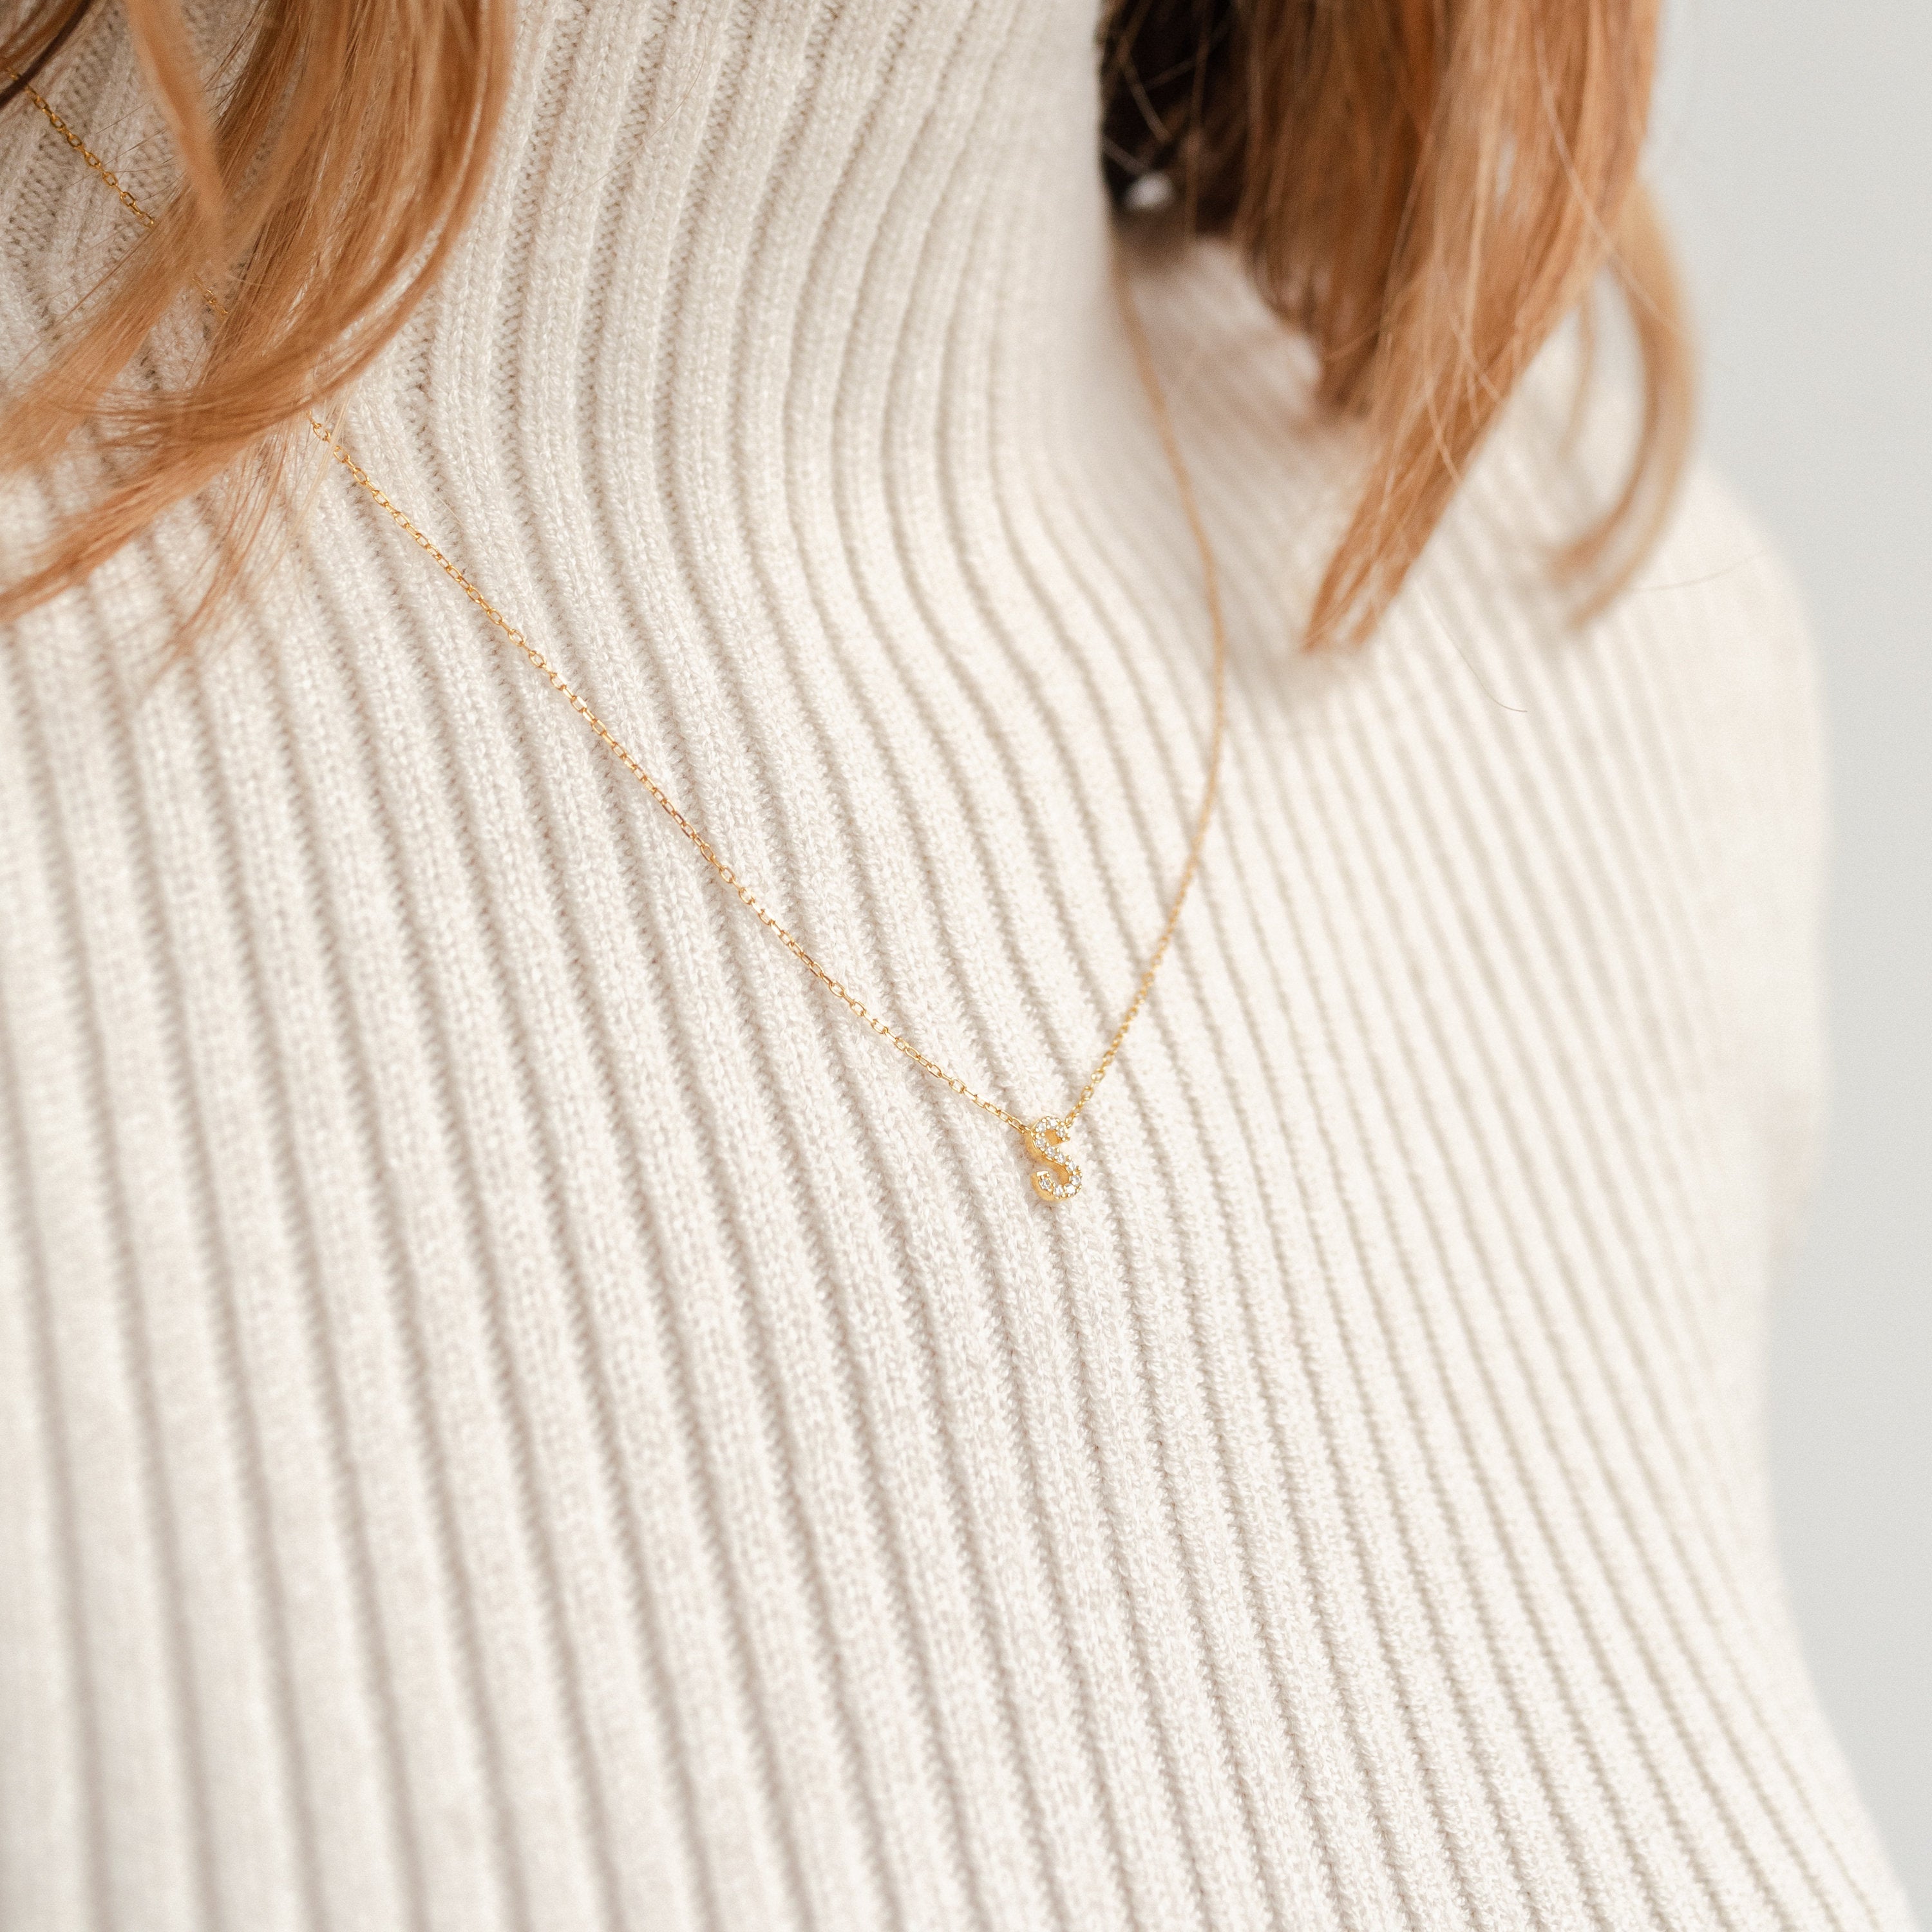 Dainty Gold Filled Initial Letter Charm Necklace – The Cord Gallery